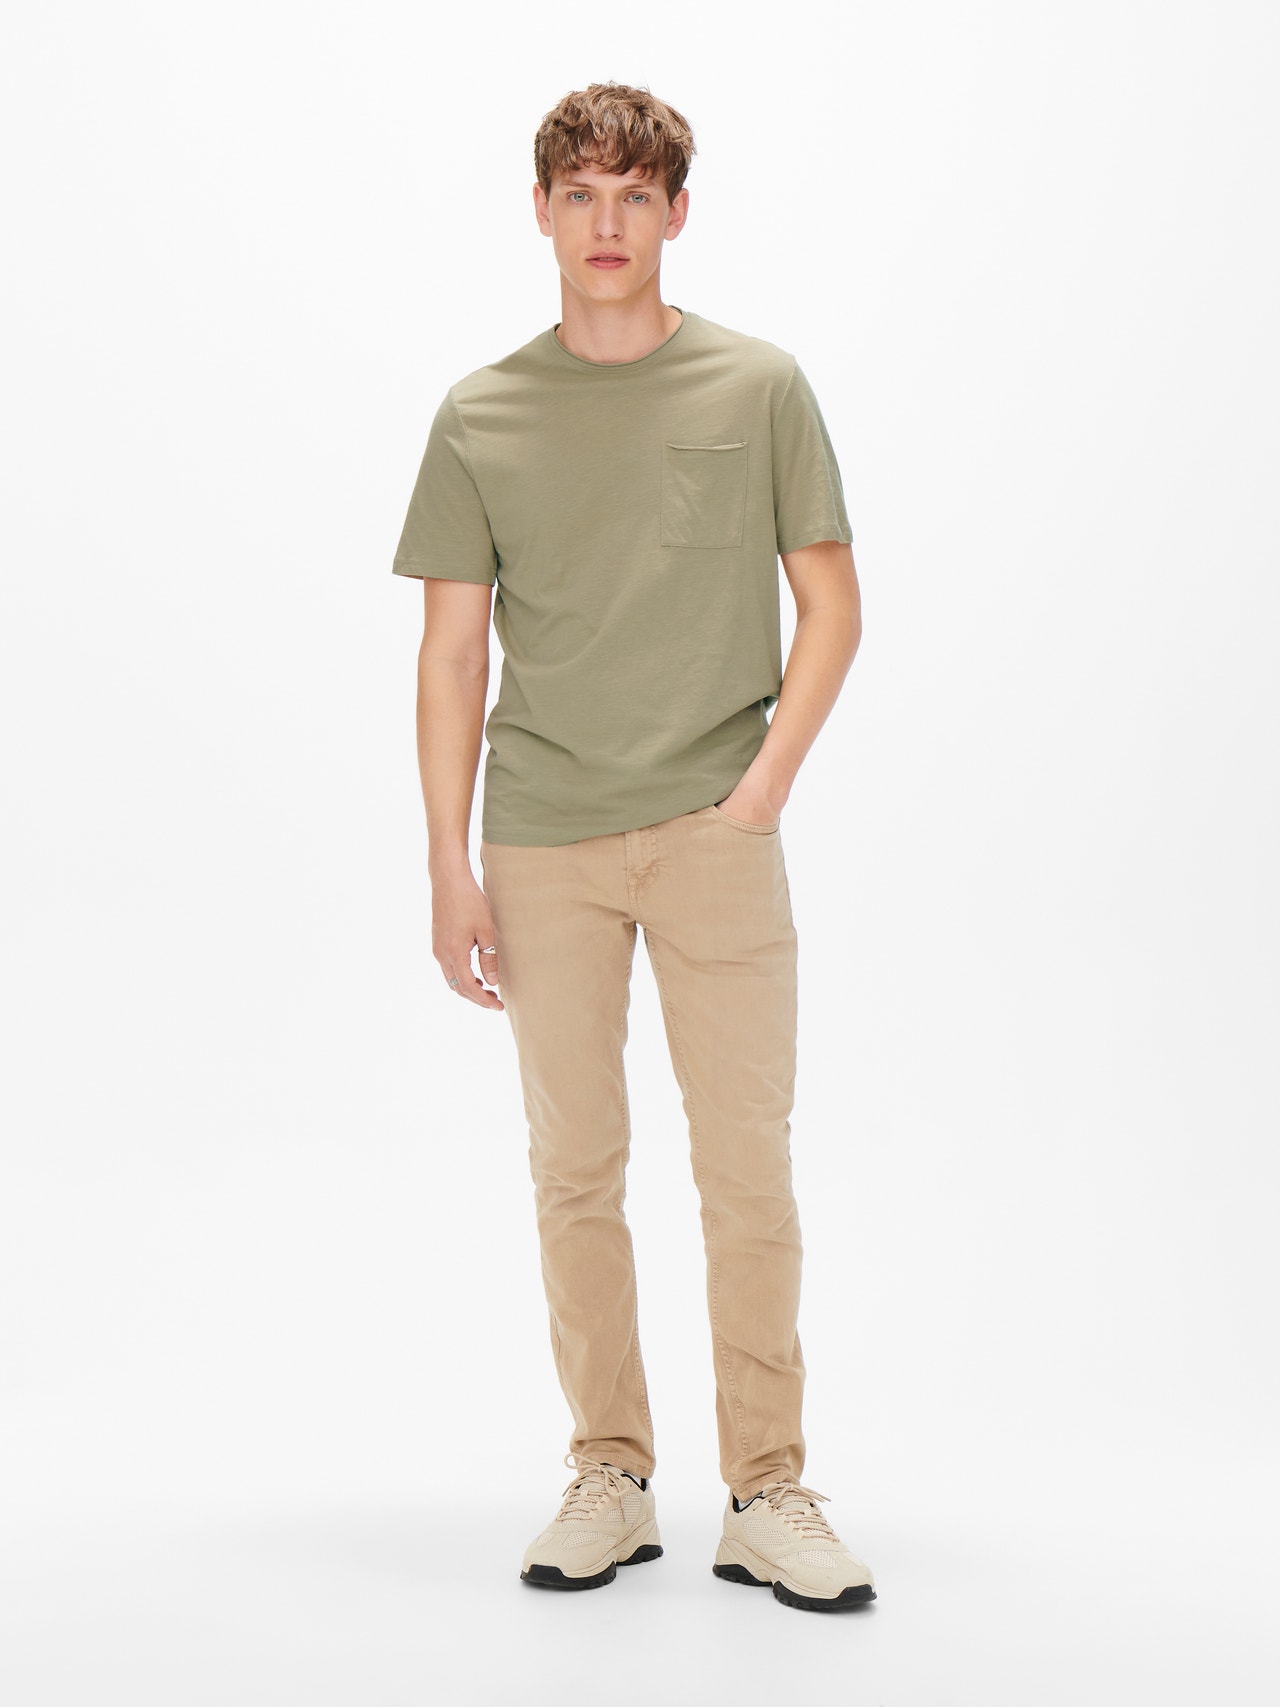 ONLY & SONS O-hals t-shirt med brystlomme -Chinchilla - 22022531